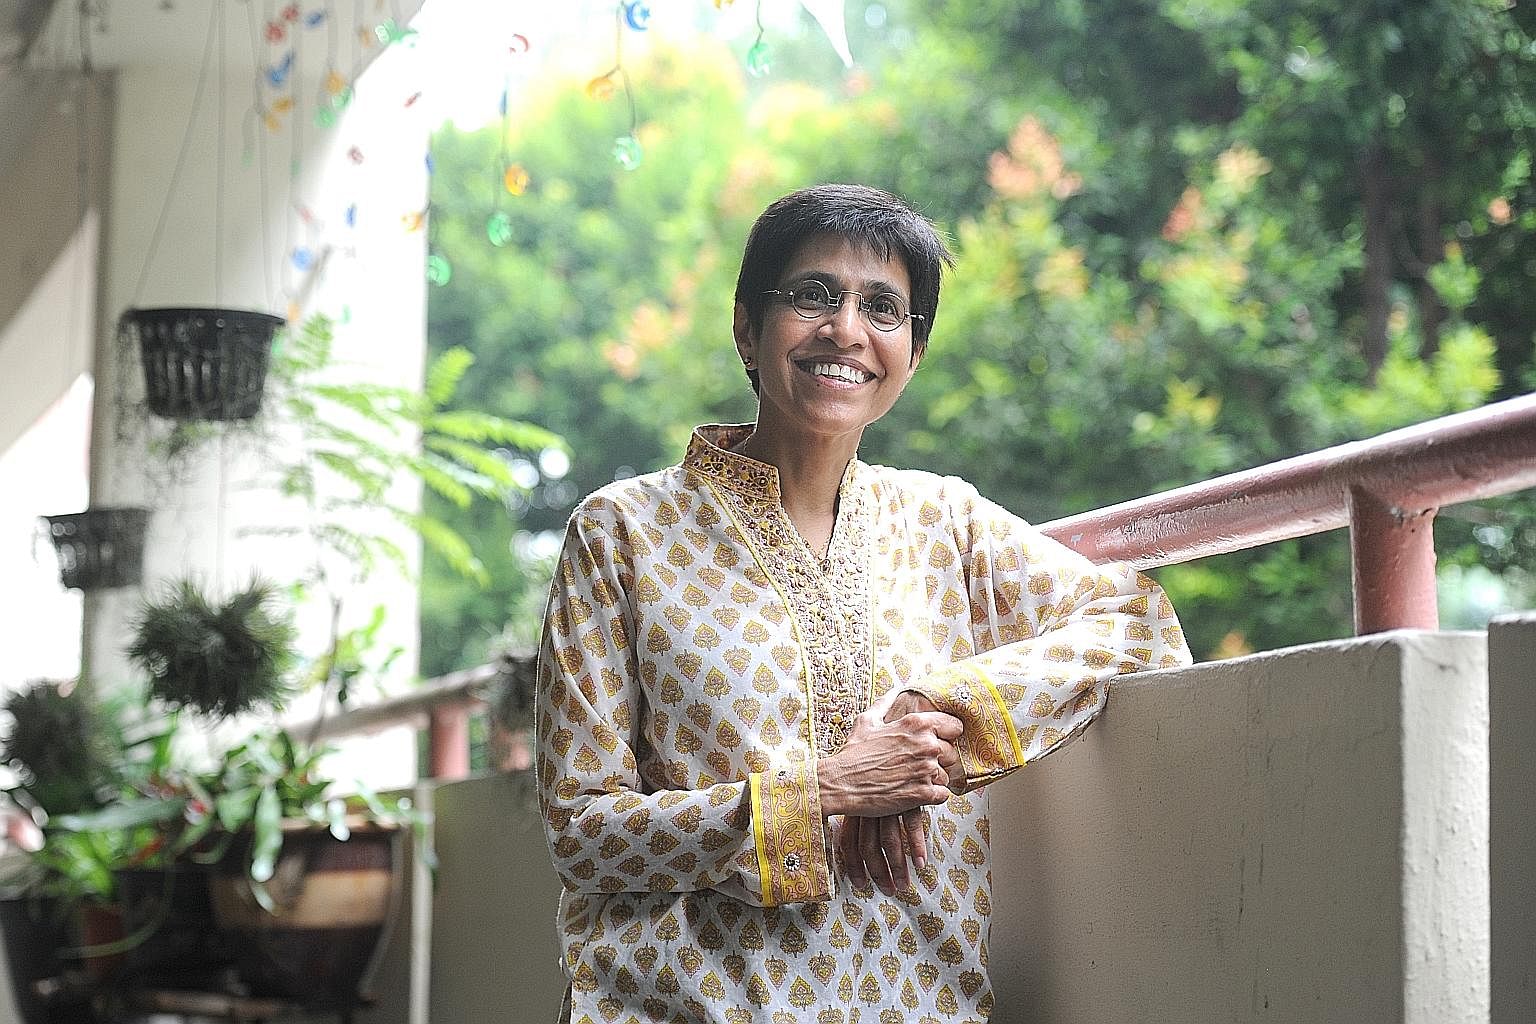 Dr Nair mingling with children at the Ang Mo Kio Family Service Centre, where she worked from 1987 to 2003. Dr Nair's work on family violence has been groundbreaking, helping to shape public policy. In 1999, she founded the Centre for Promoting Alter